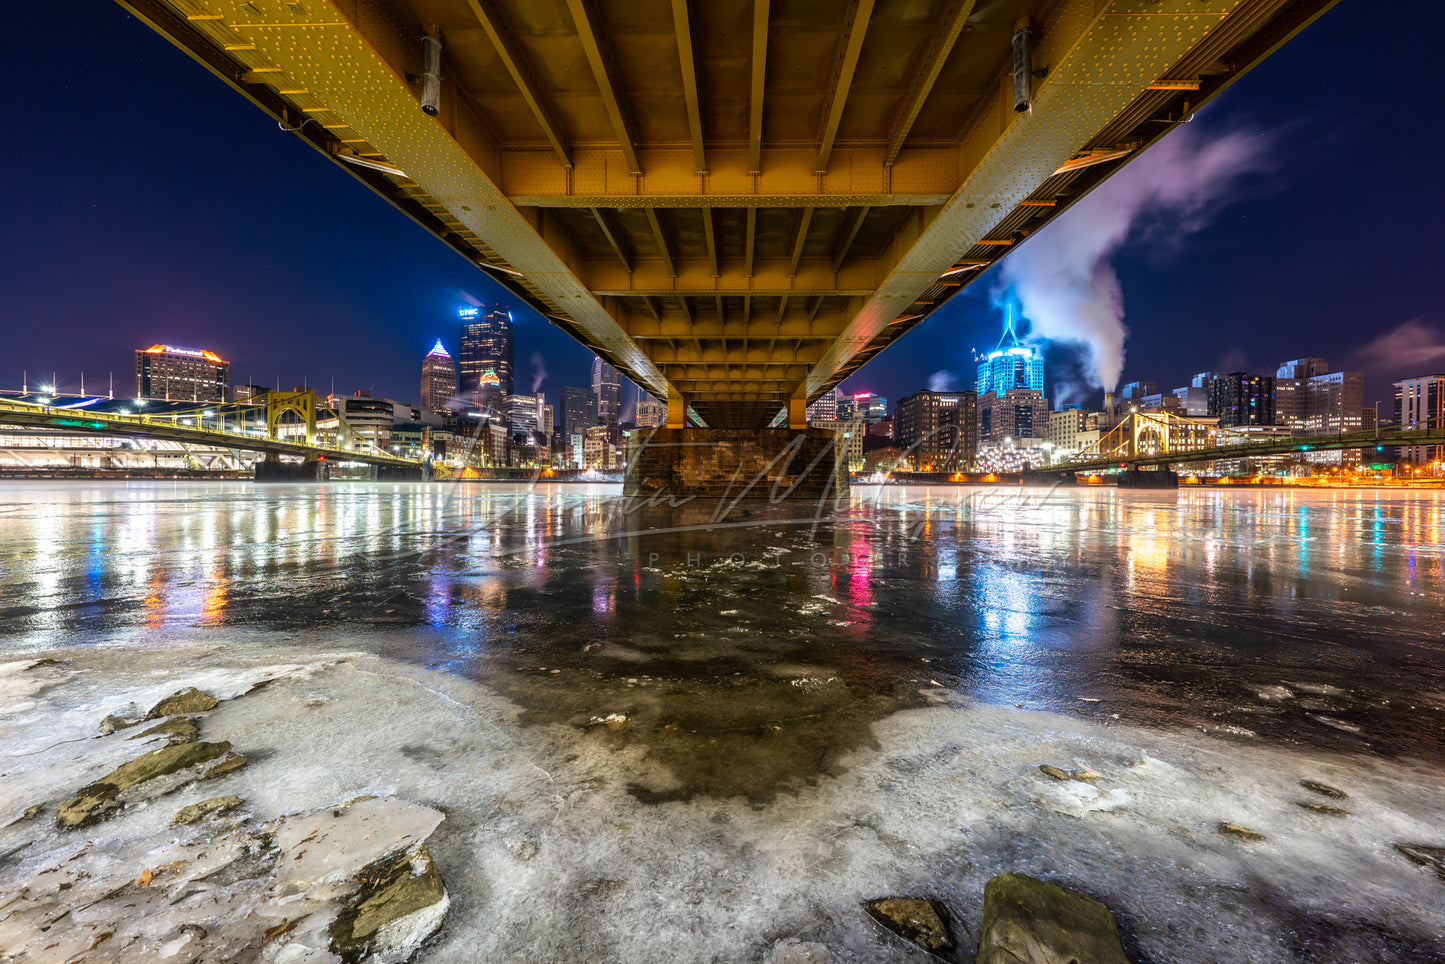 Frozen Allegheny River and Pittsburgh Skyline from Under the Andy Warhol Bridge